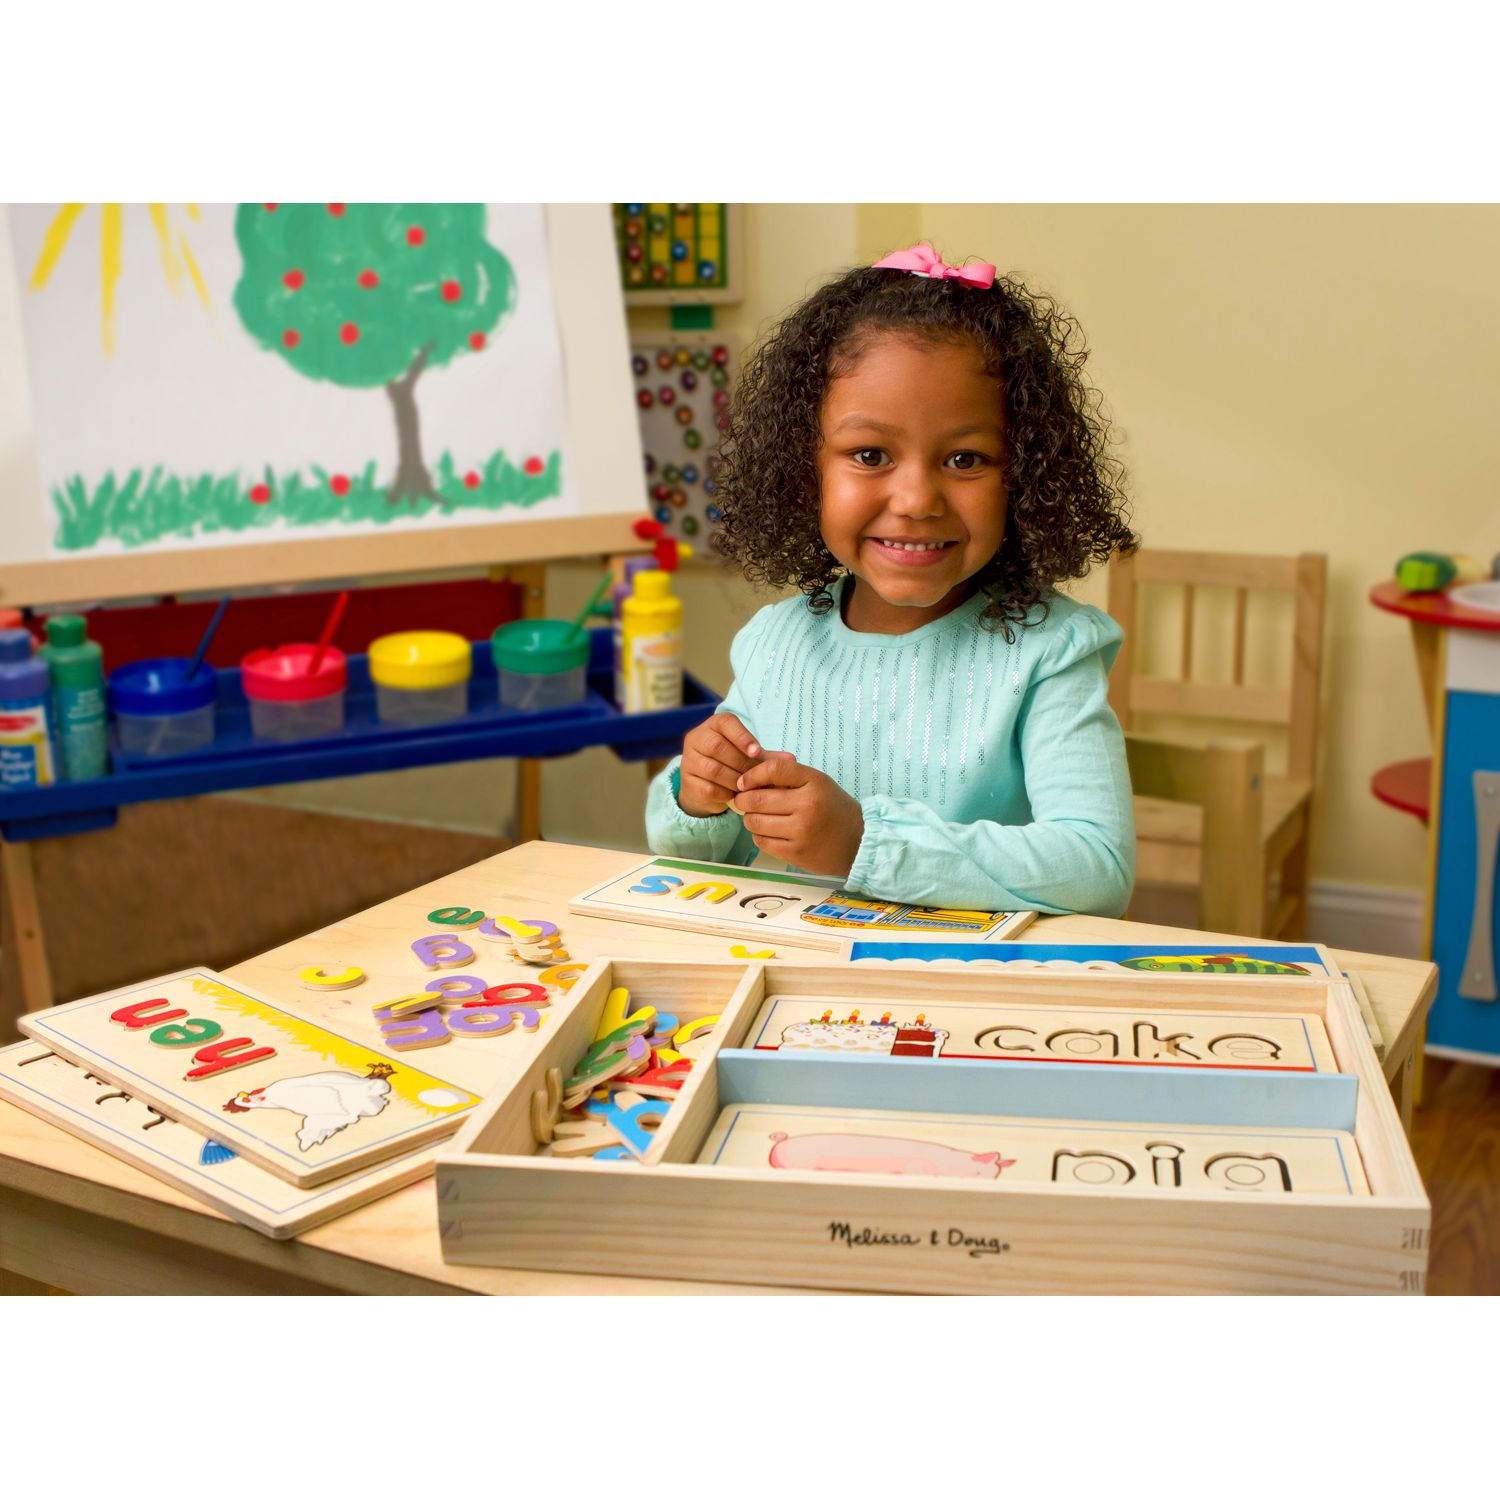 melissa & doug see & spell learning toy